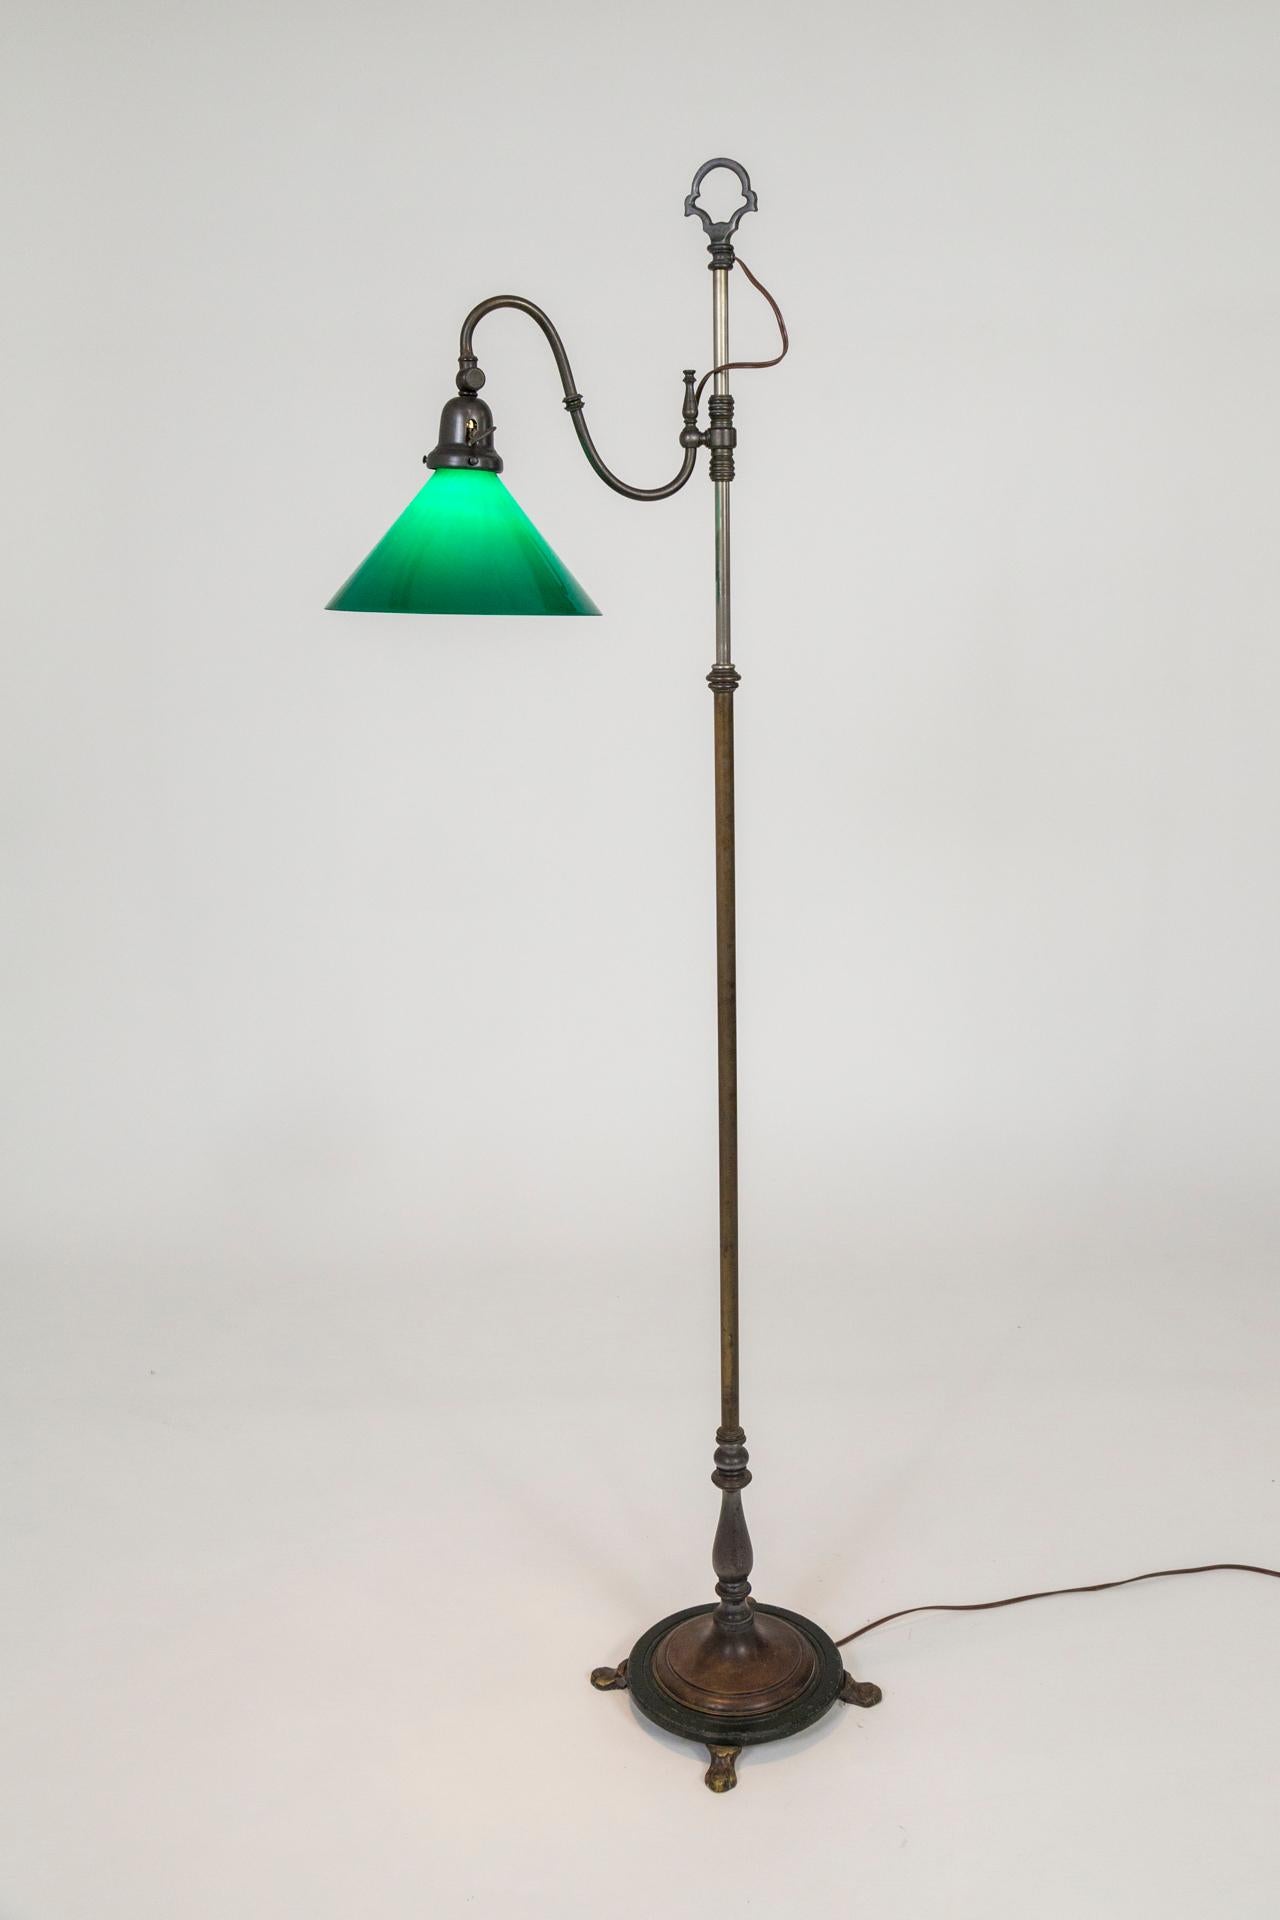 A handsome 1930s American floor lamp with brass paw feet, from Horn & Brannen Manufacturing Co. of Philadelphia. The base is brass and hunter green painted, heavy metal. (See the sister lamp in our storefront with black painted metal). A great,